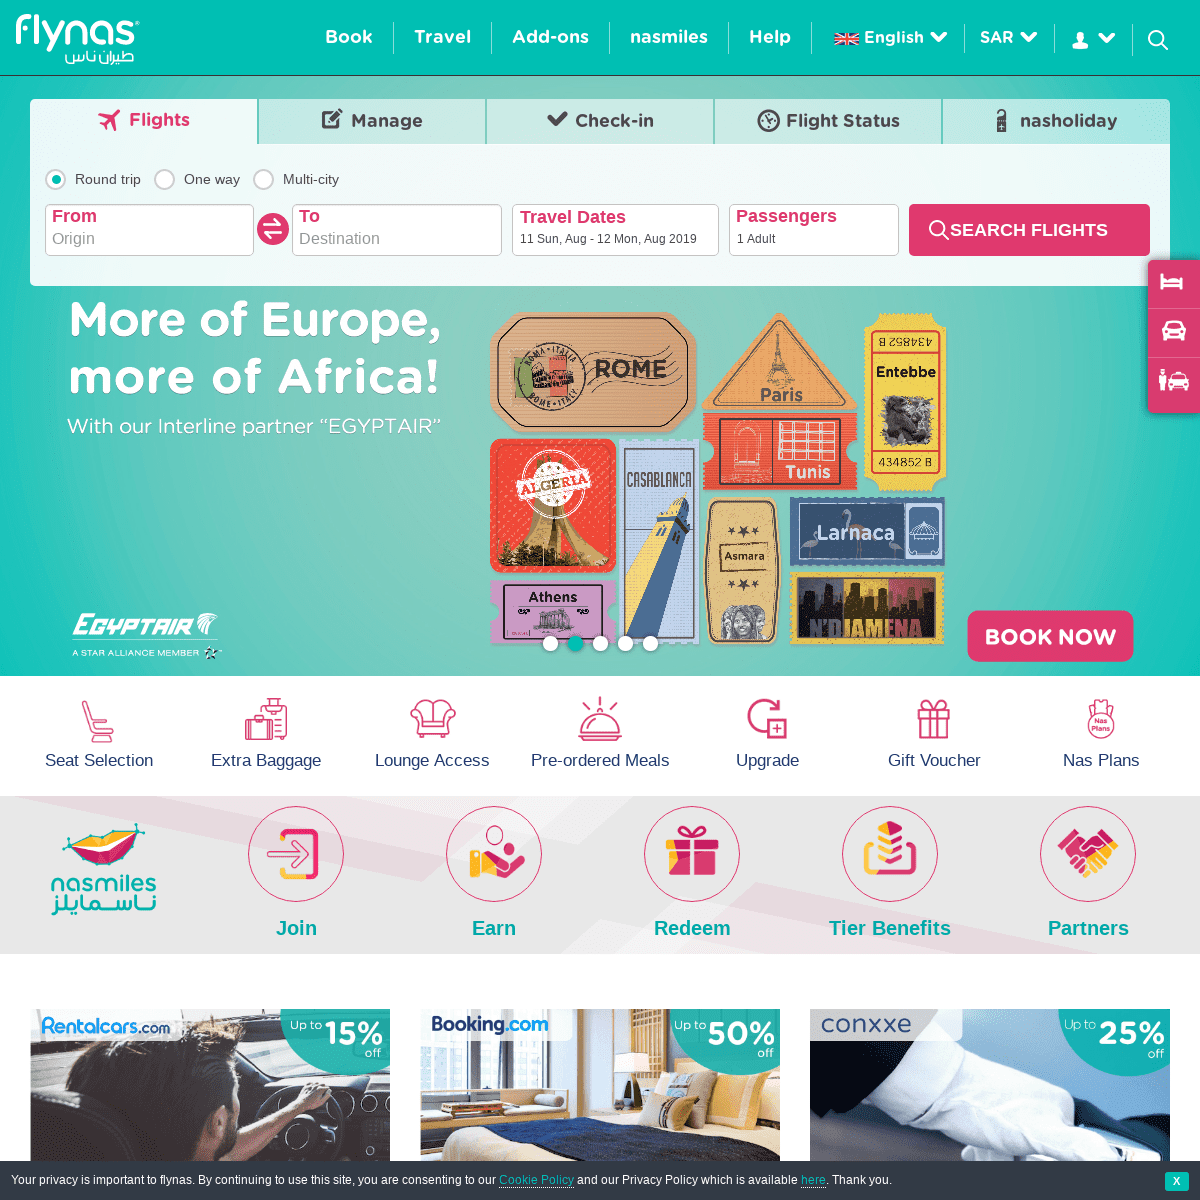 flynas | Modern low cost Saudi airline offering cheap flights